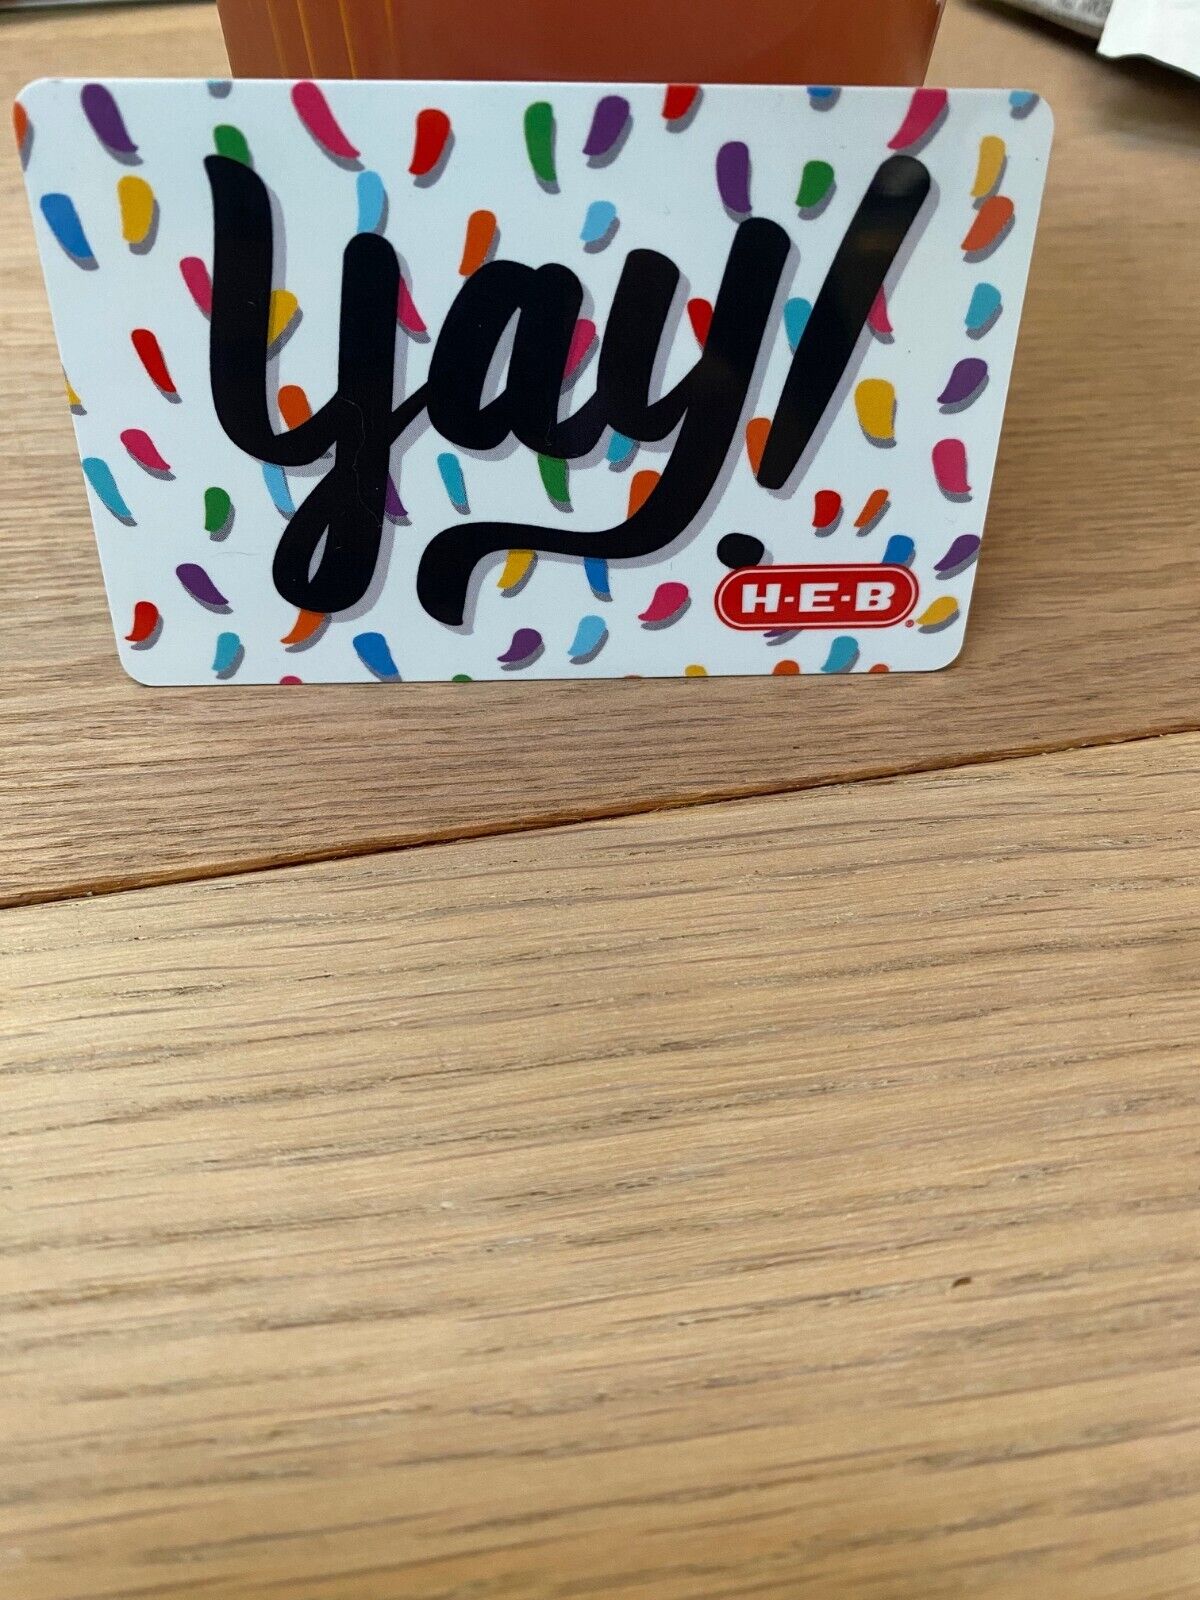 Heb Gift Card $10